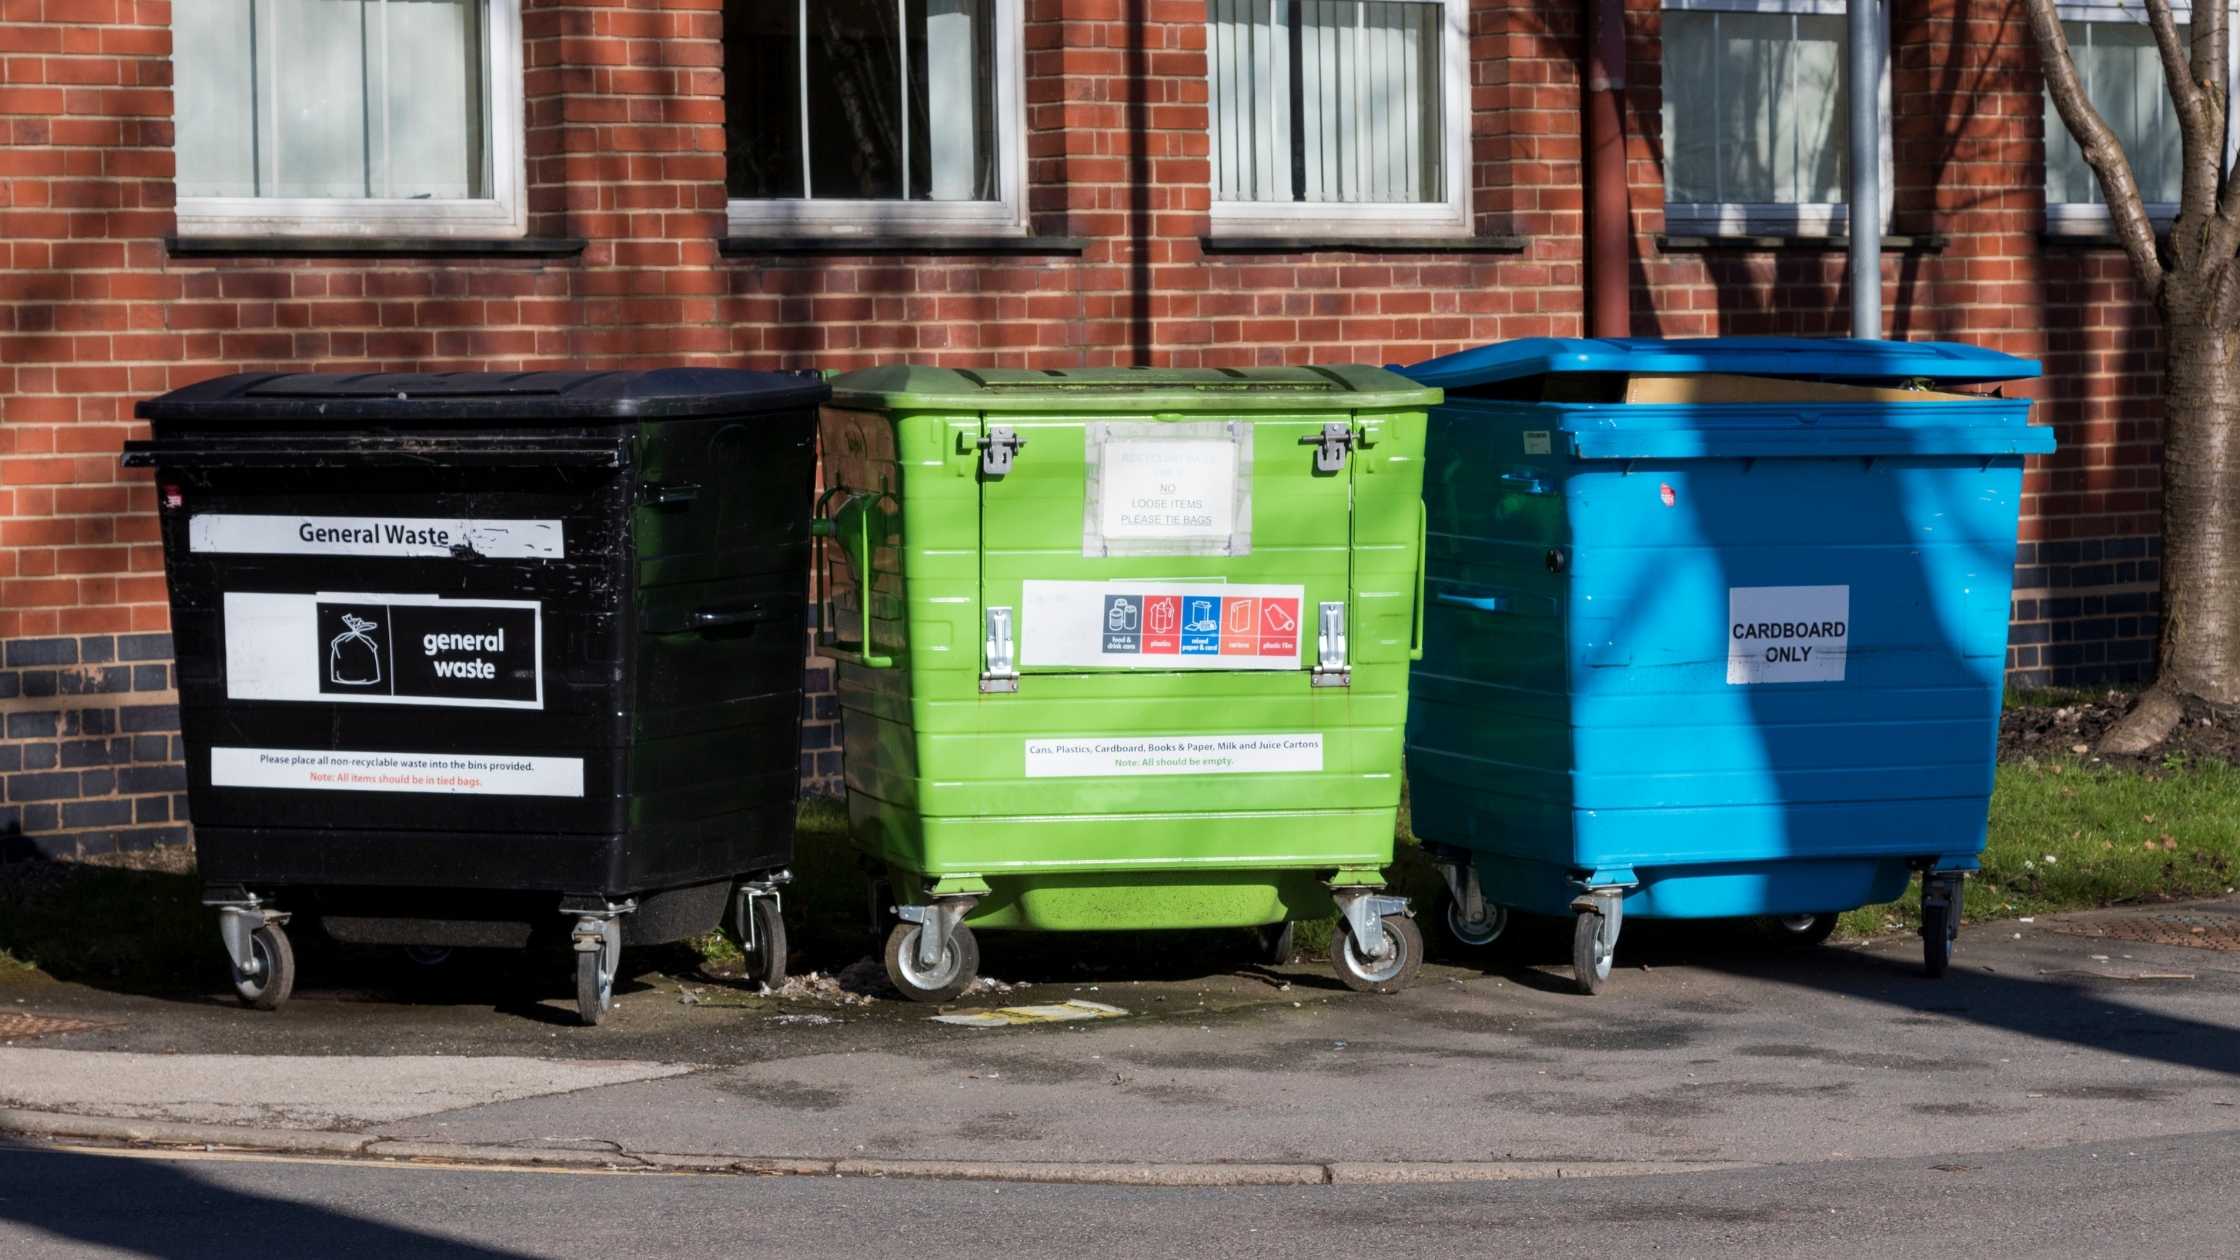 image showing three waste containers - recycling, garbage, and organic